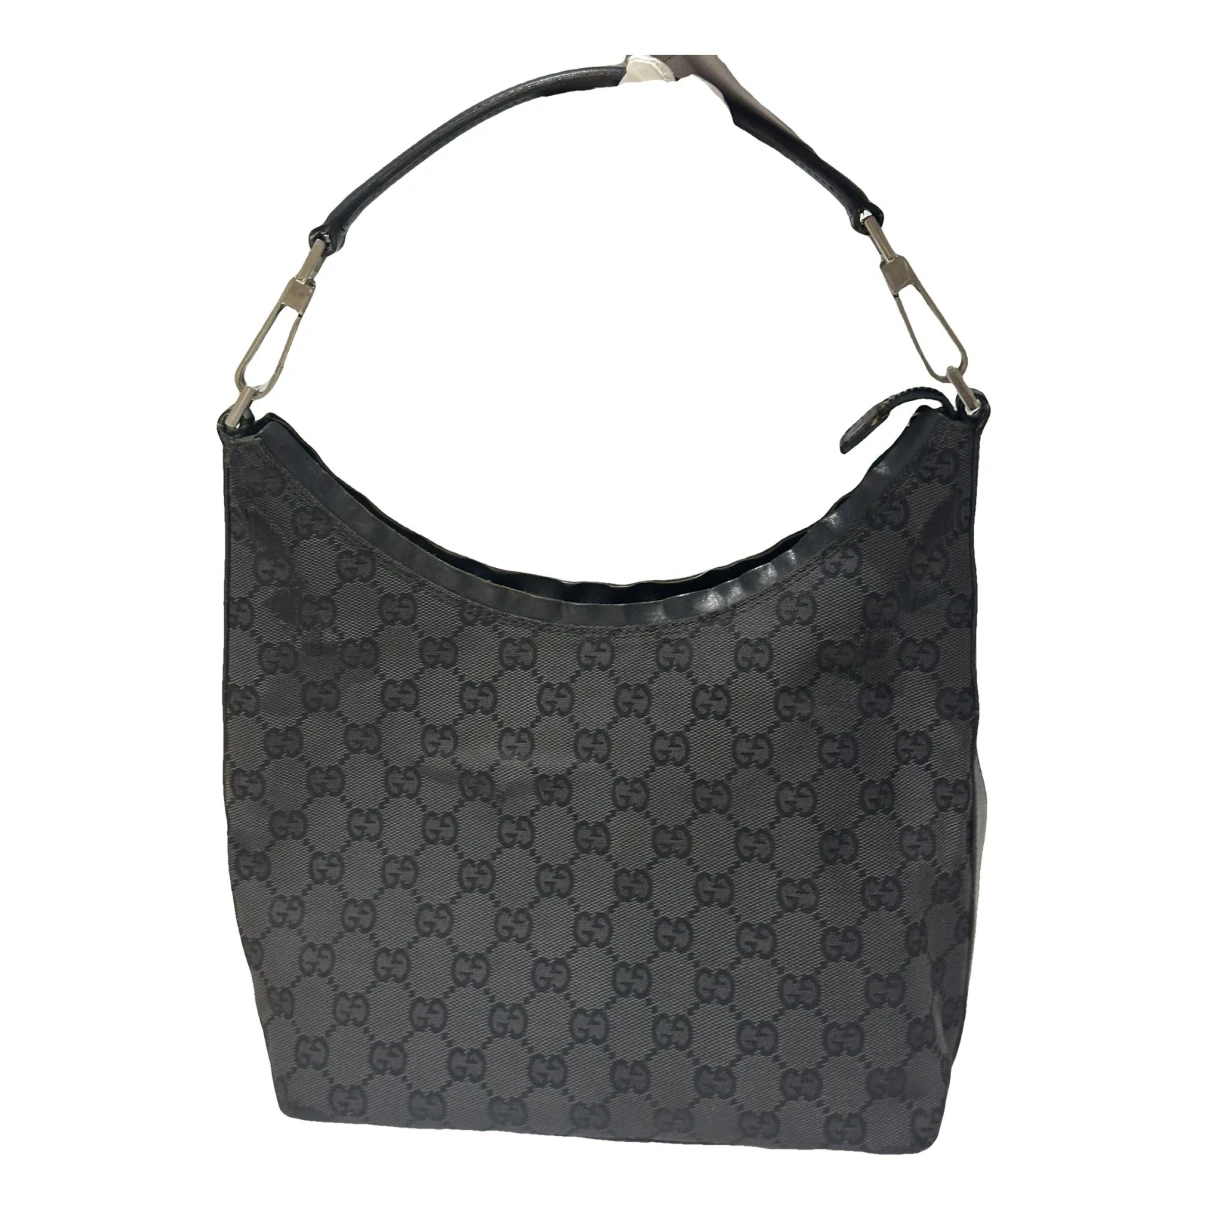 bags Gucci handbags Hobo for Female Cloth. Used condition